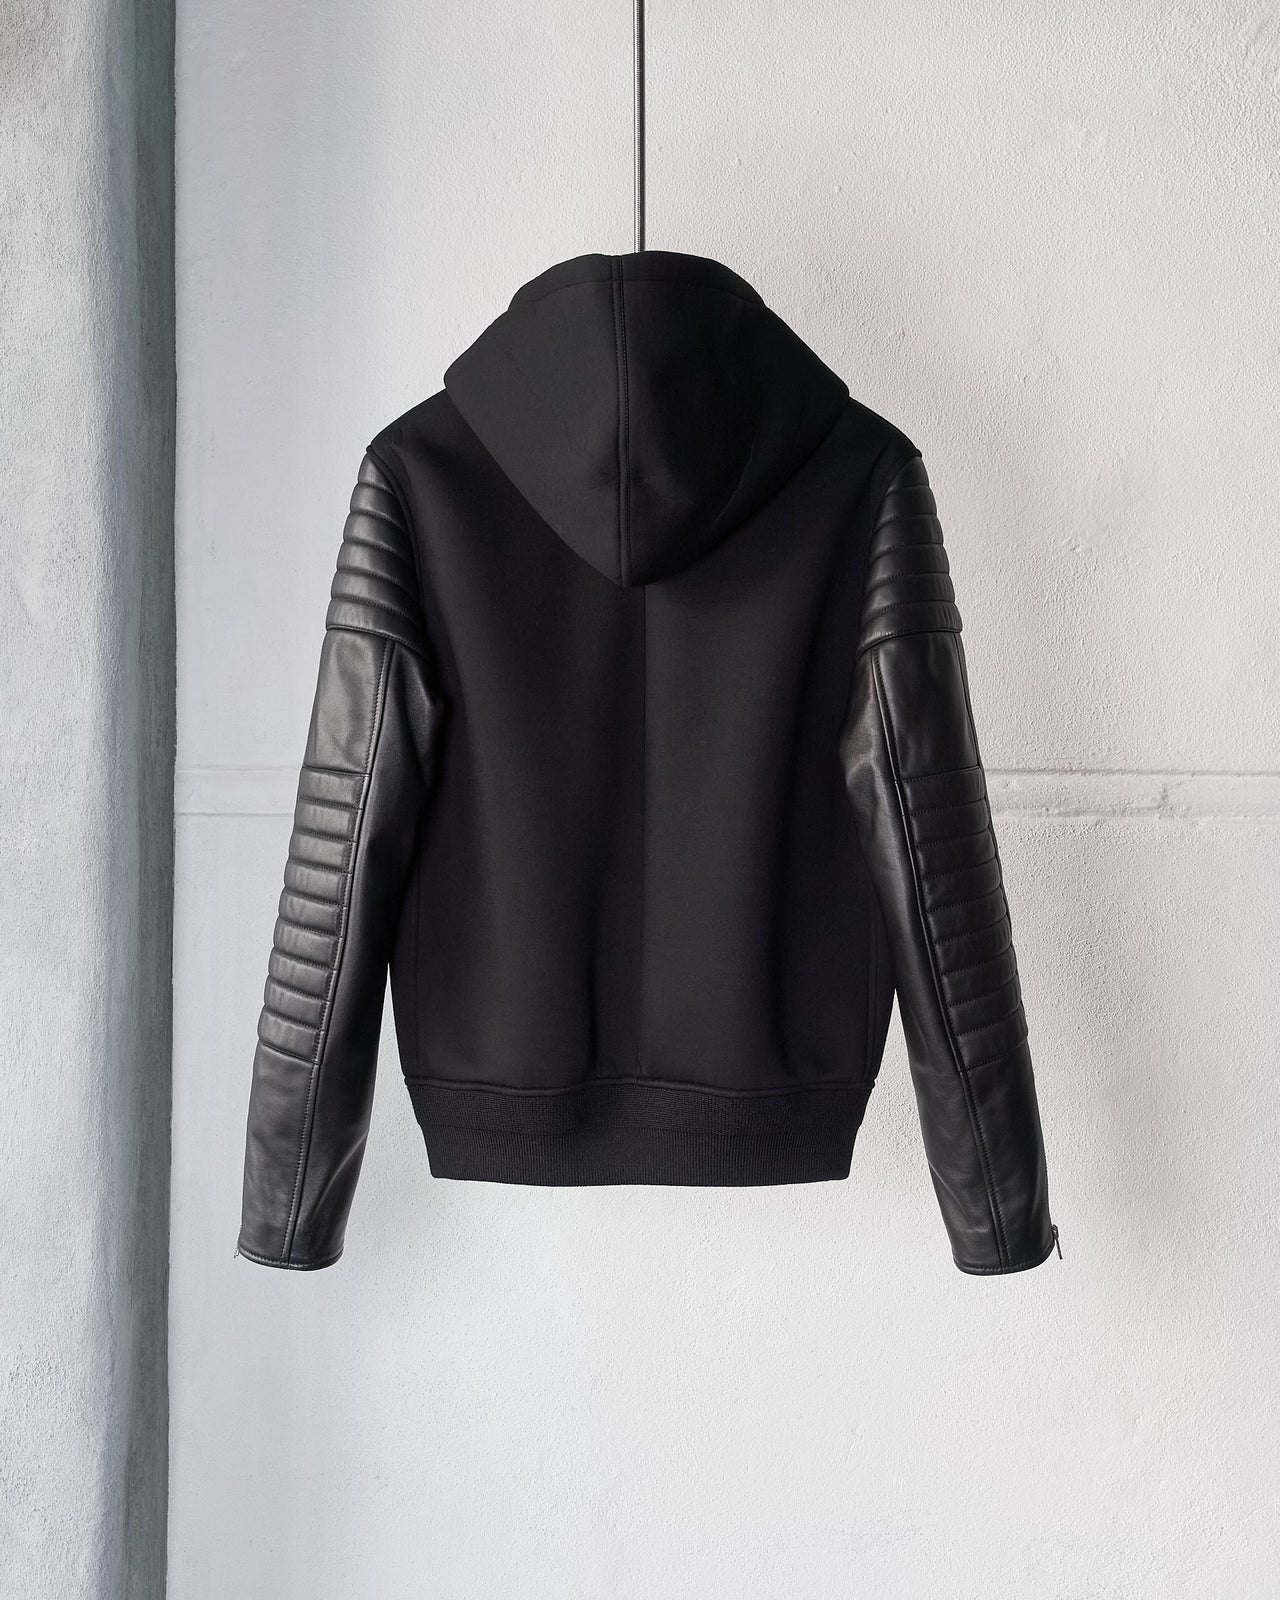 Givenchy Neoprene and leather bomber jacket with hood